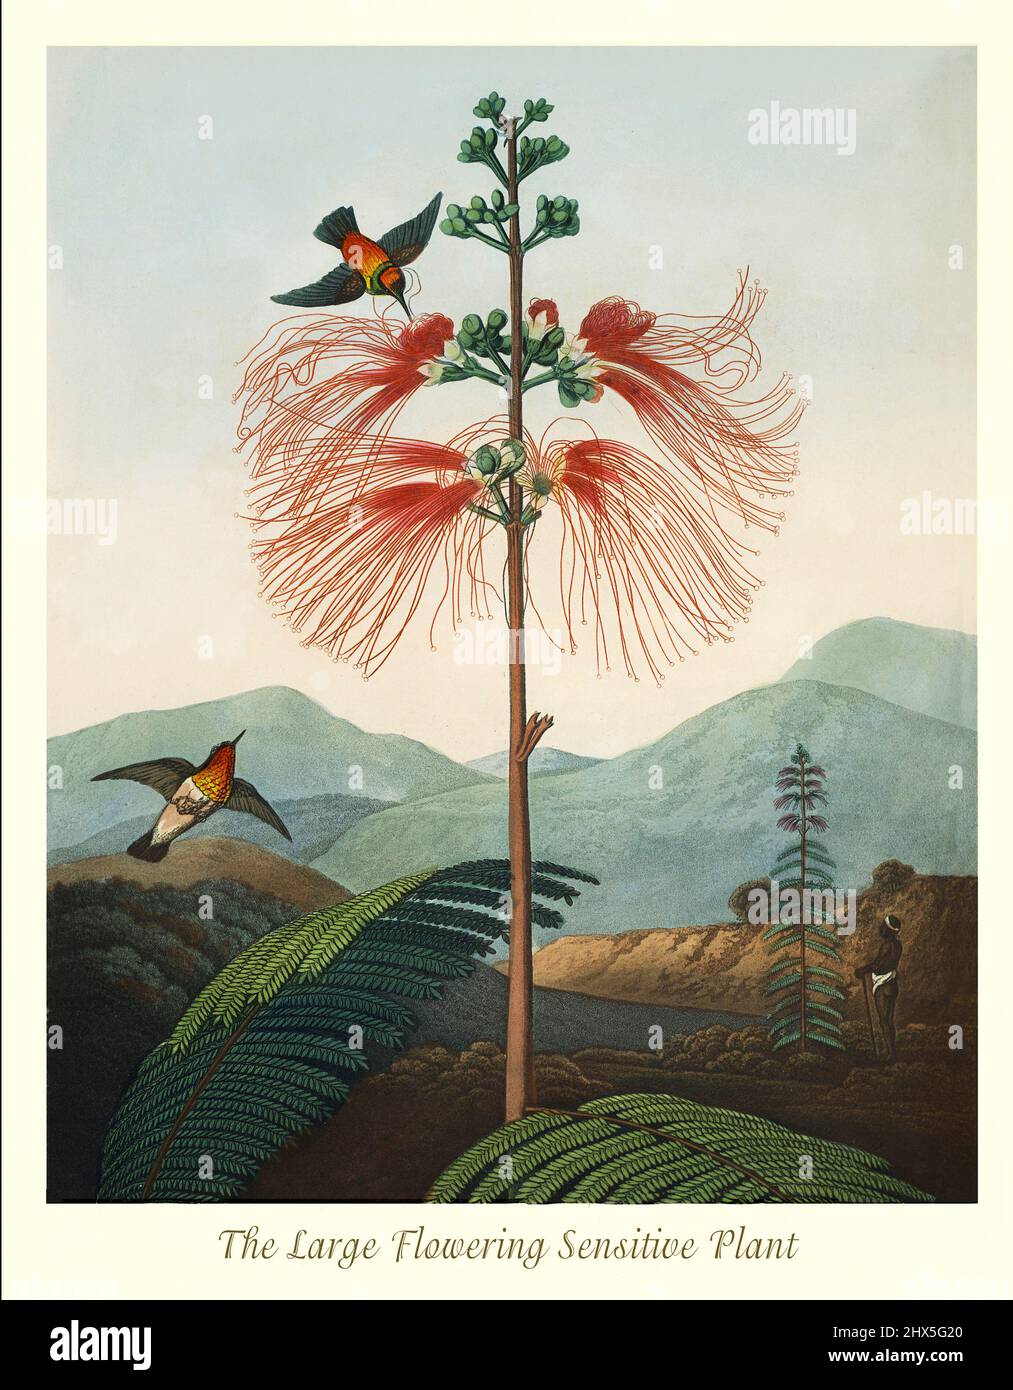 An early 19th century illustration  of the Large Flowered Sensitive Plant, a mimosa belonging to the taxonomic group Magnoliopsida and family Mimosaseae and native to Central America and South America. This artwork for Robert John Thornton's 'The Temple of Flora' in 1807, was printed, for the publisher, by T. Bensley, London, England. Stock Photo